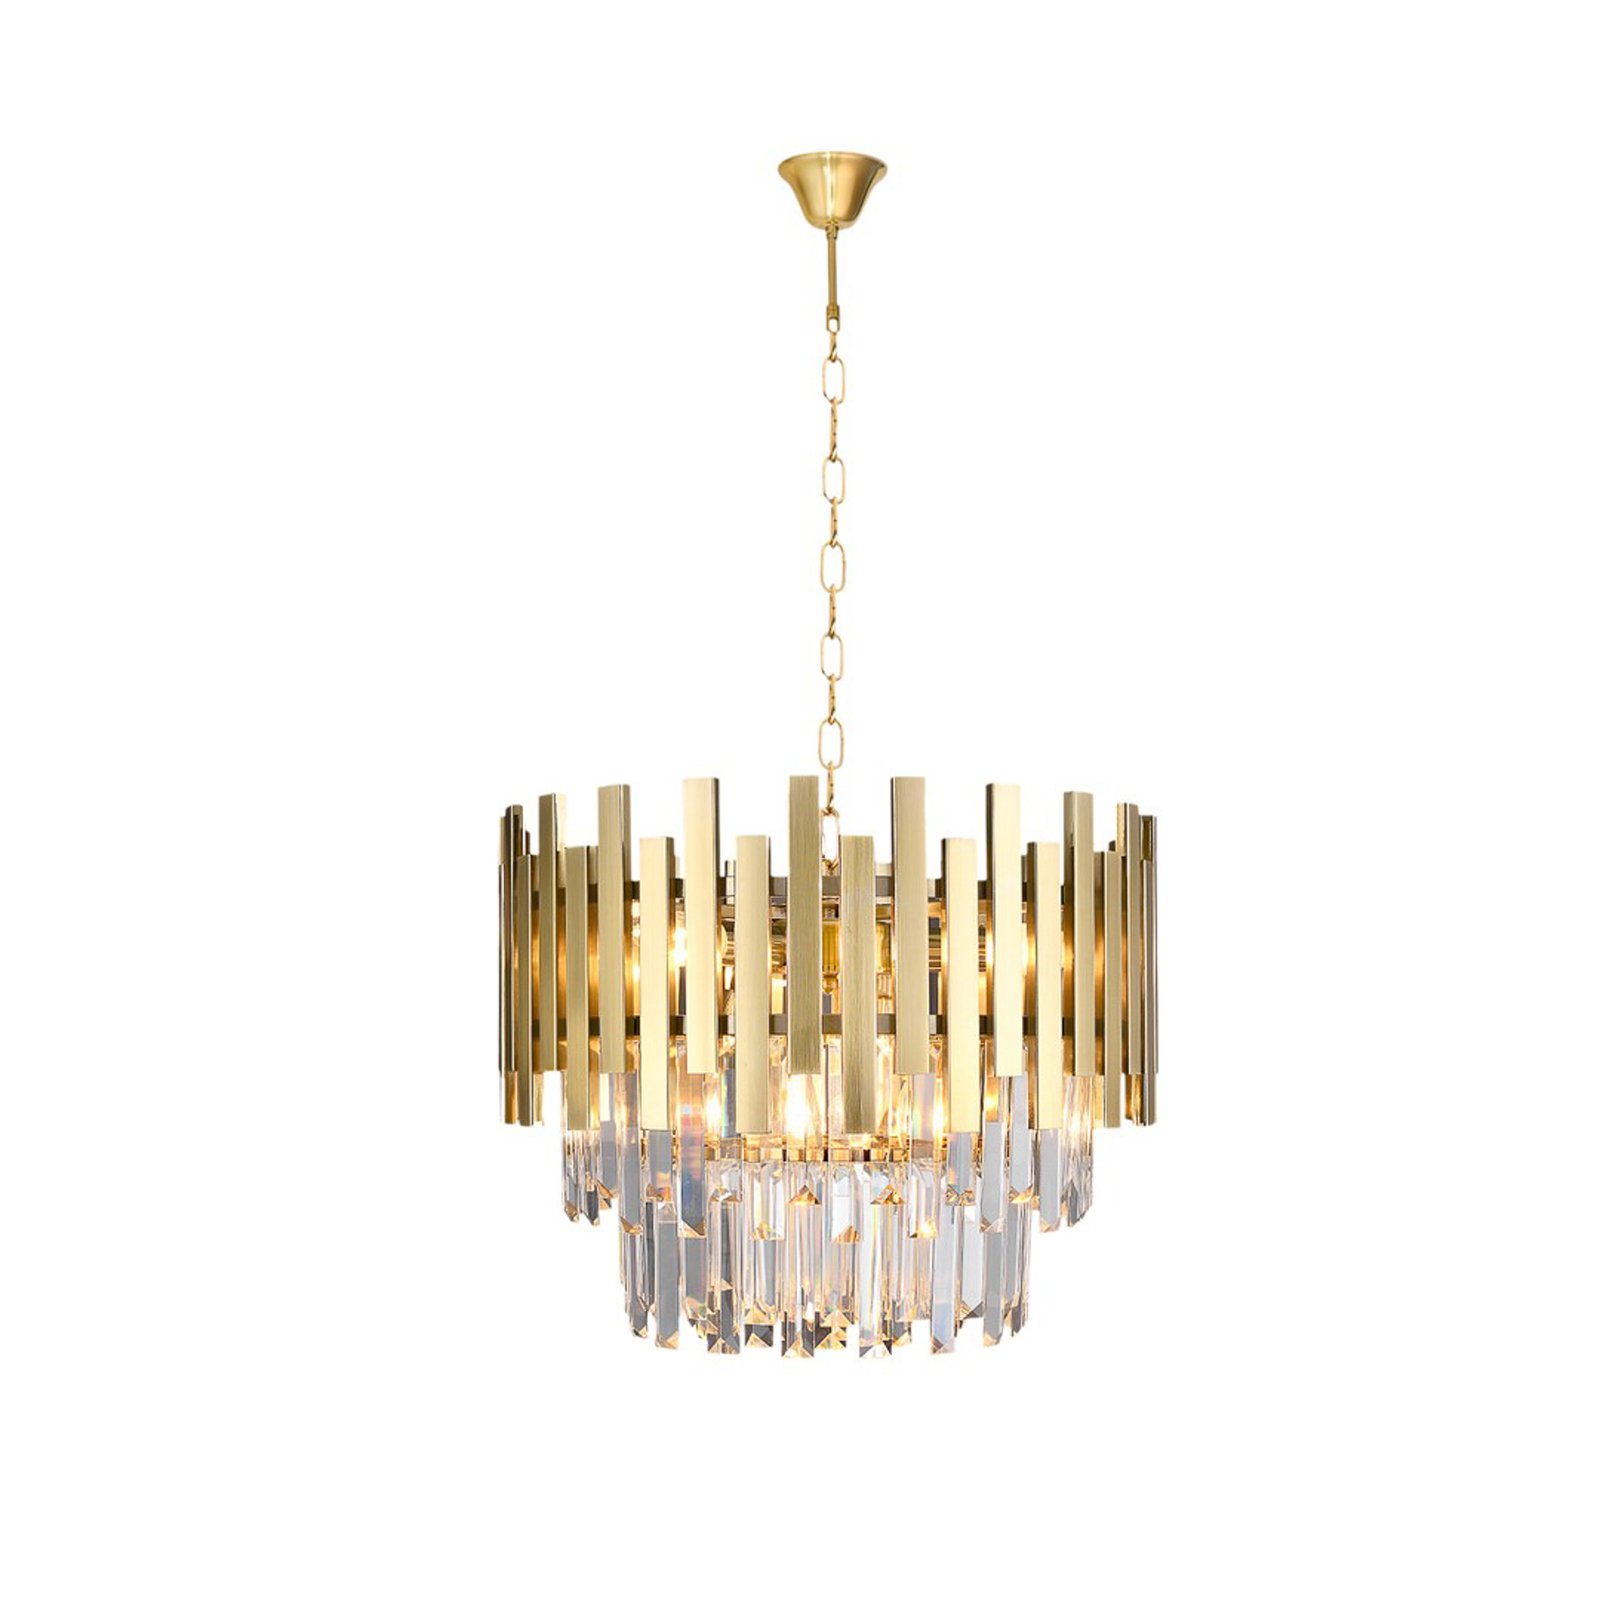 Hanging light Aspen metal gold-coloured glass crystals, height 30 cm